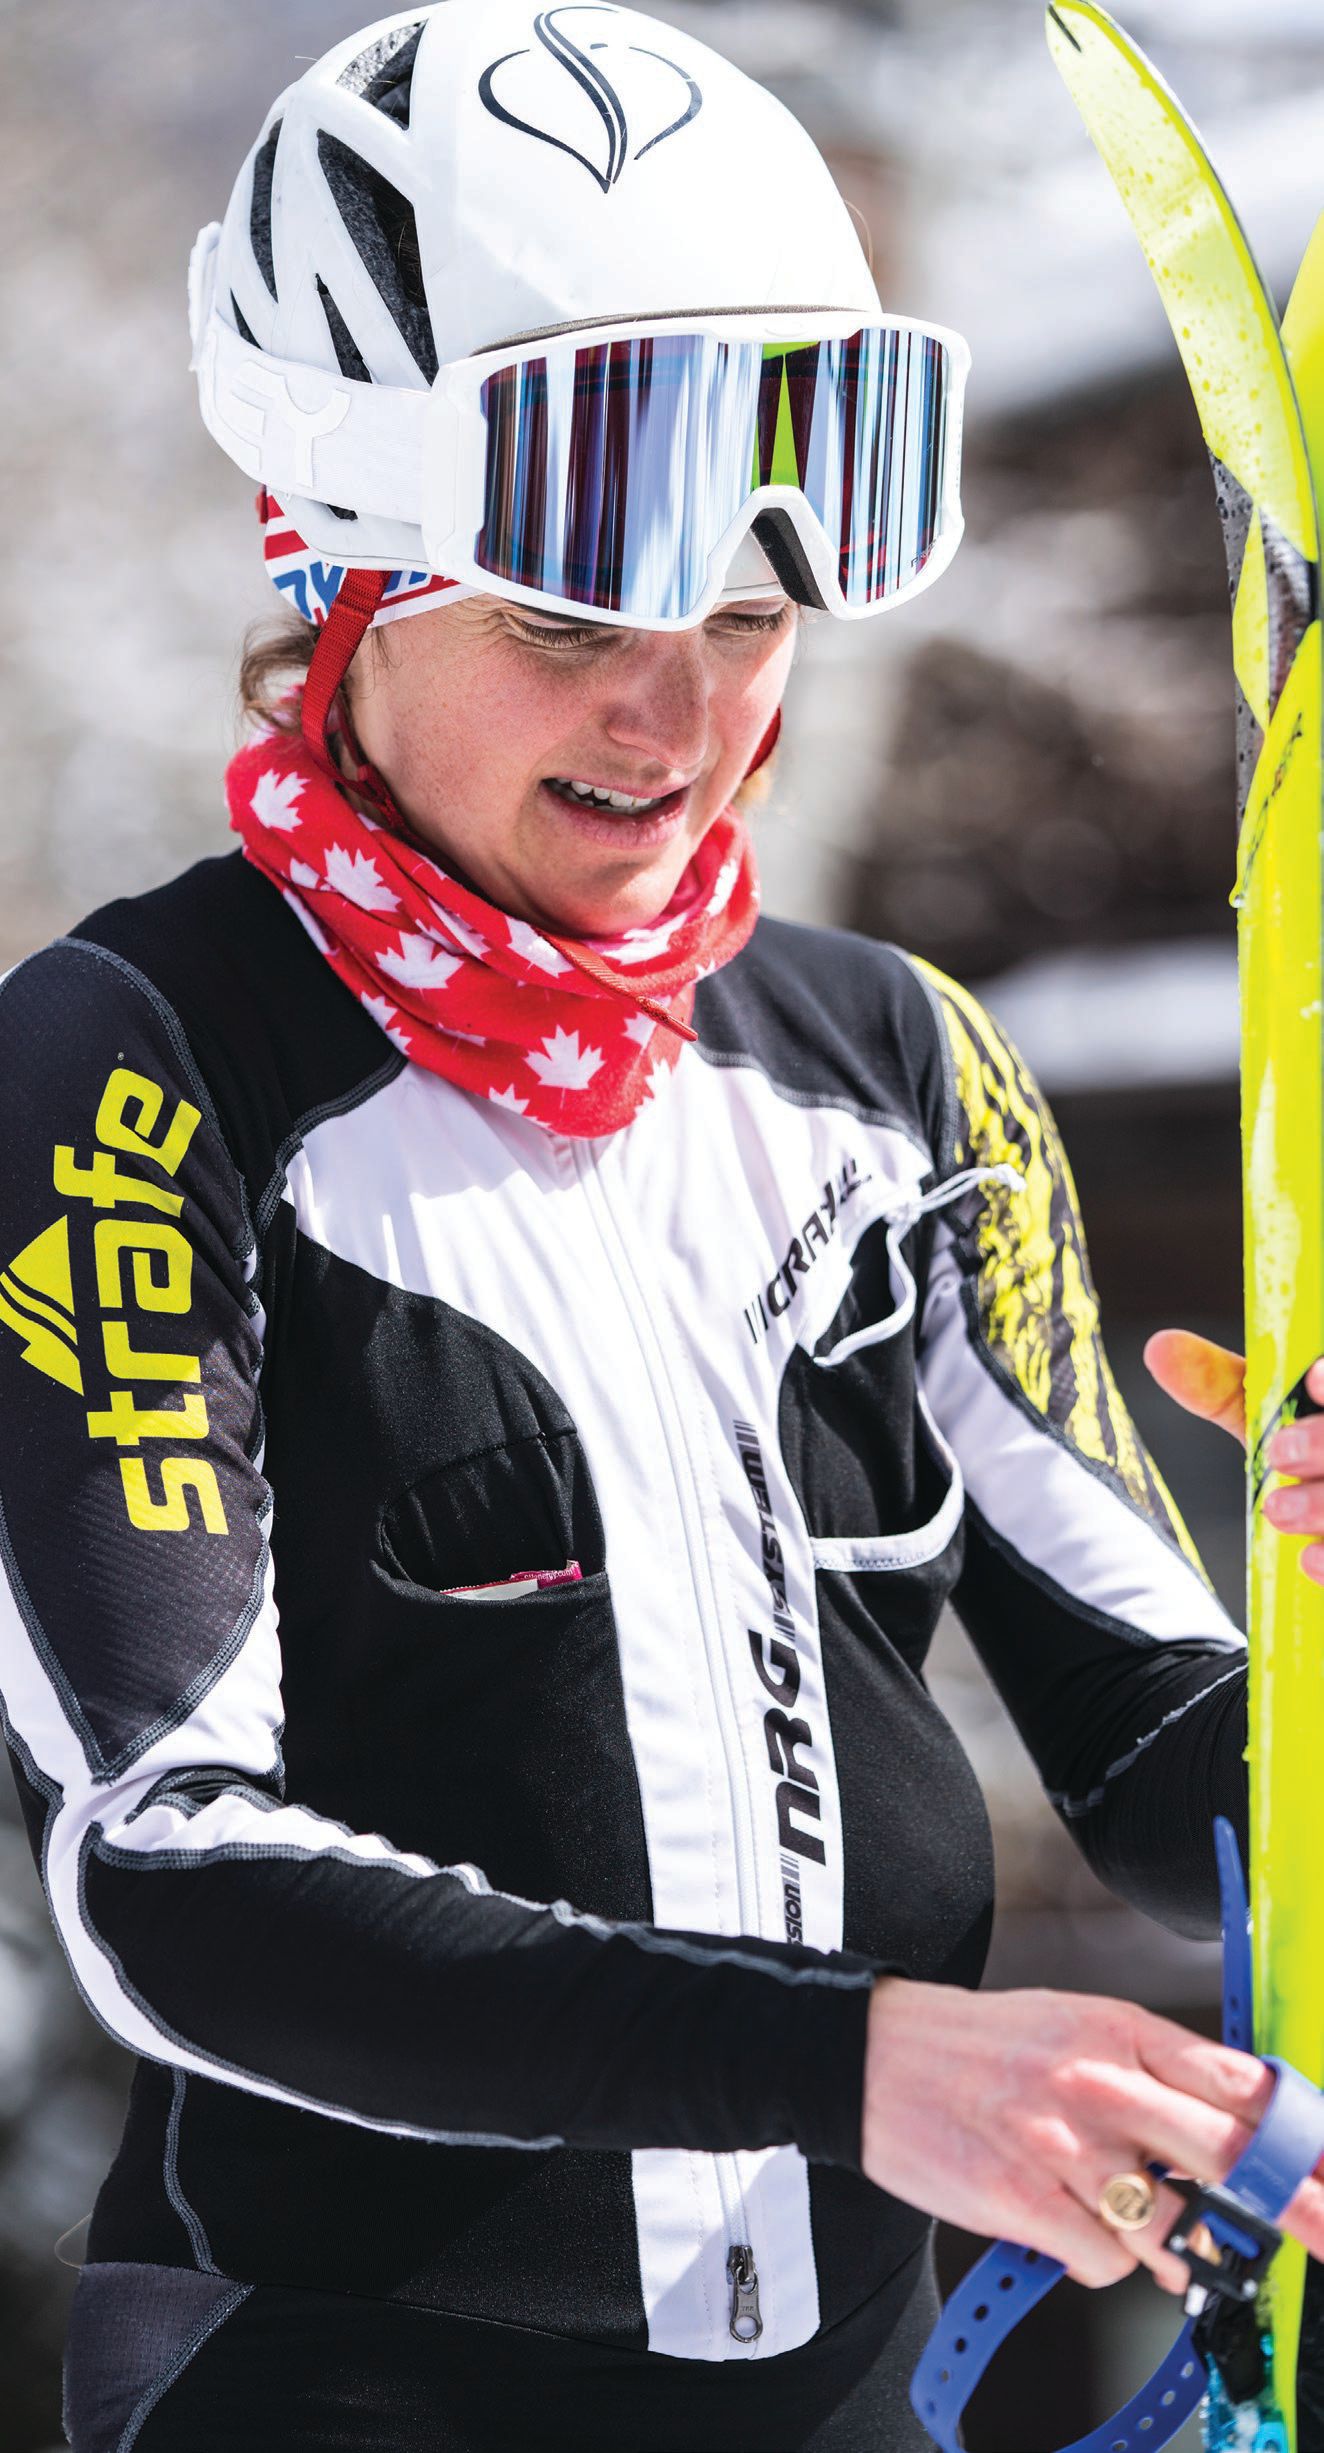  Caroline Tory in the finish at Aspen Mountain right after the race. PHOTOGRAPHED BY KELSEY COON, ACCLIMATE STUDIOS